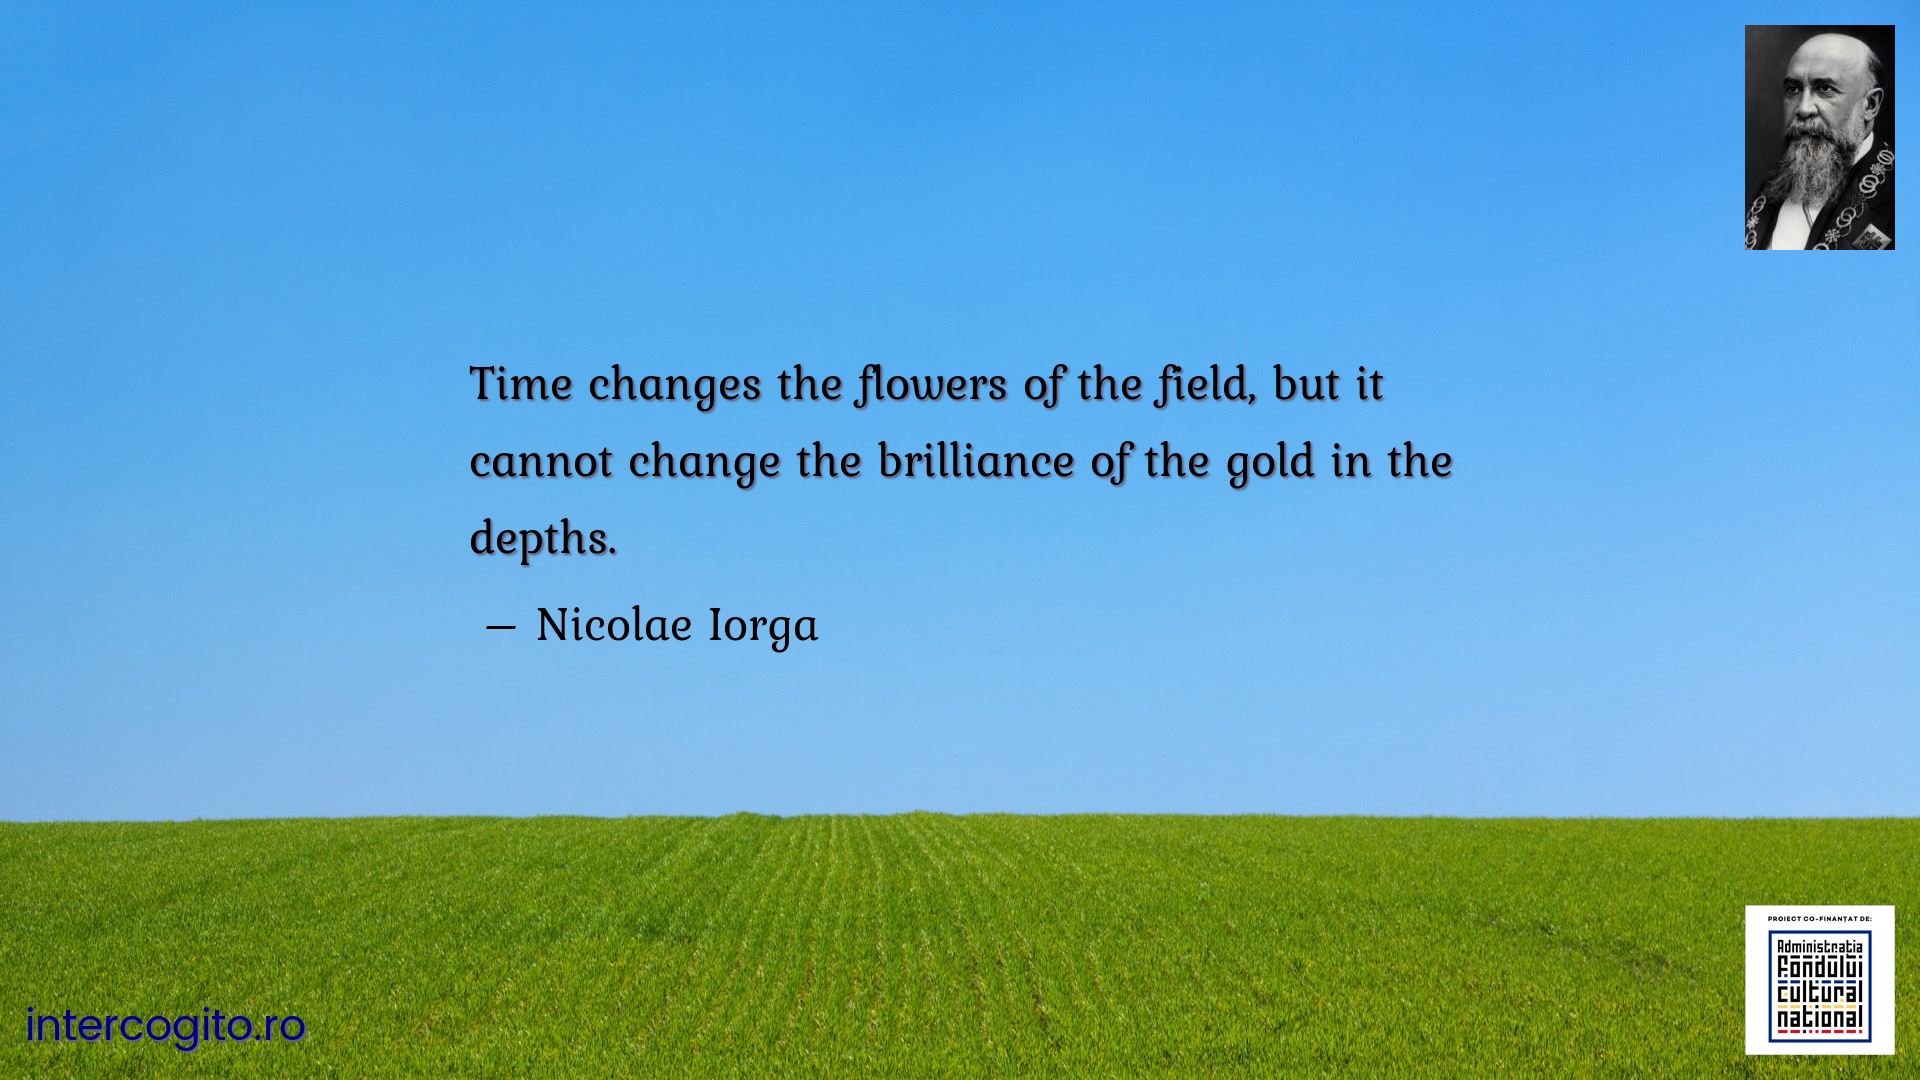 Time changes the flowers of the field, but it cannot change the brilliance of the gold in the depths.